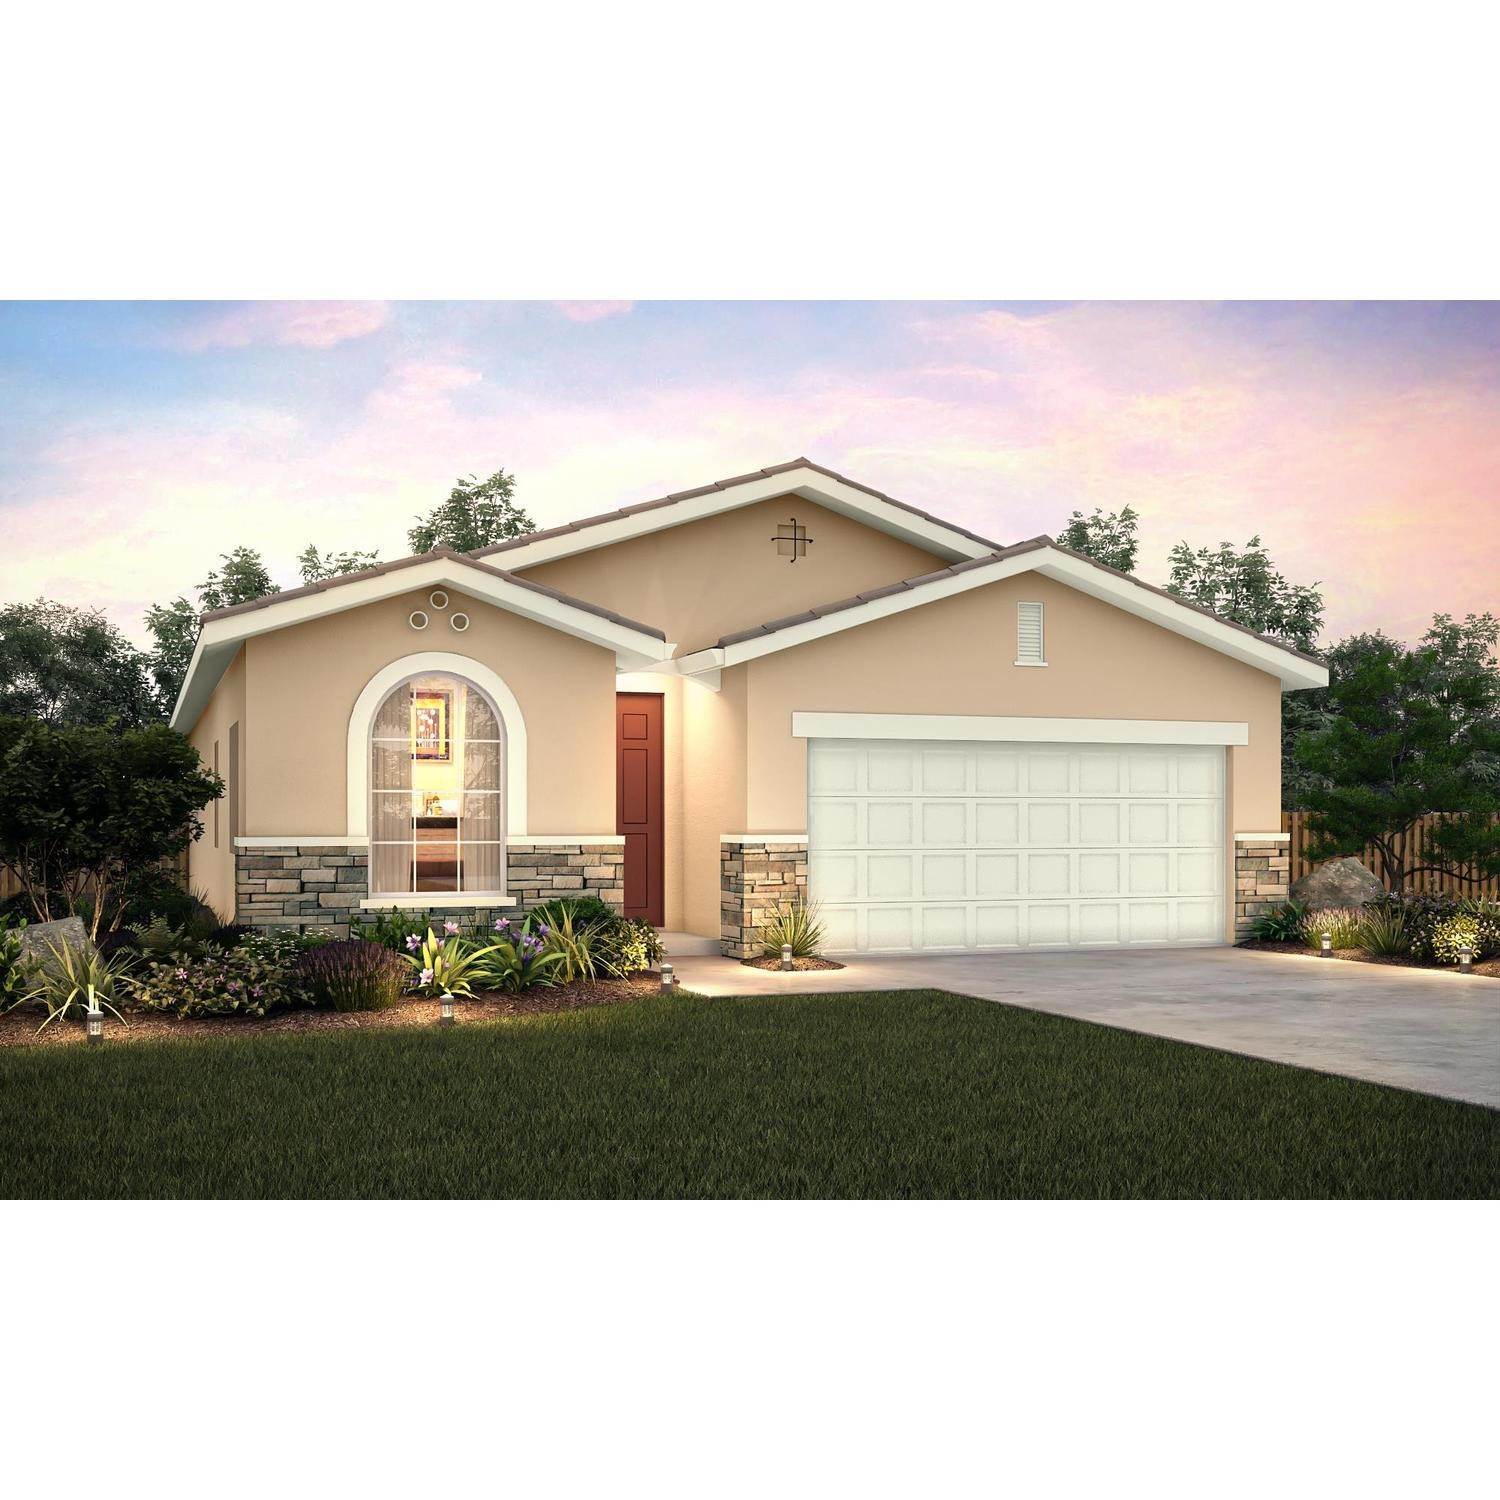 Single Family for Sale at Merced, CA 95348